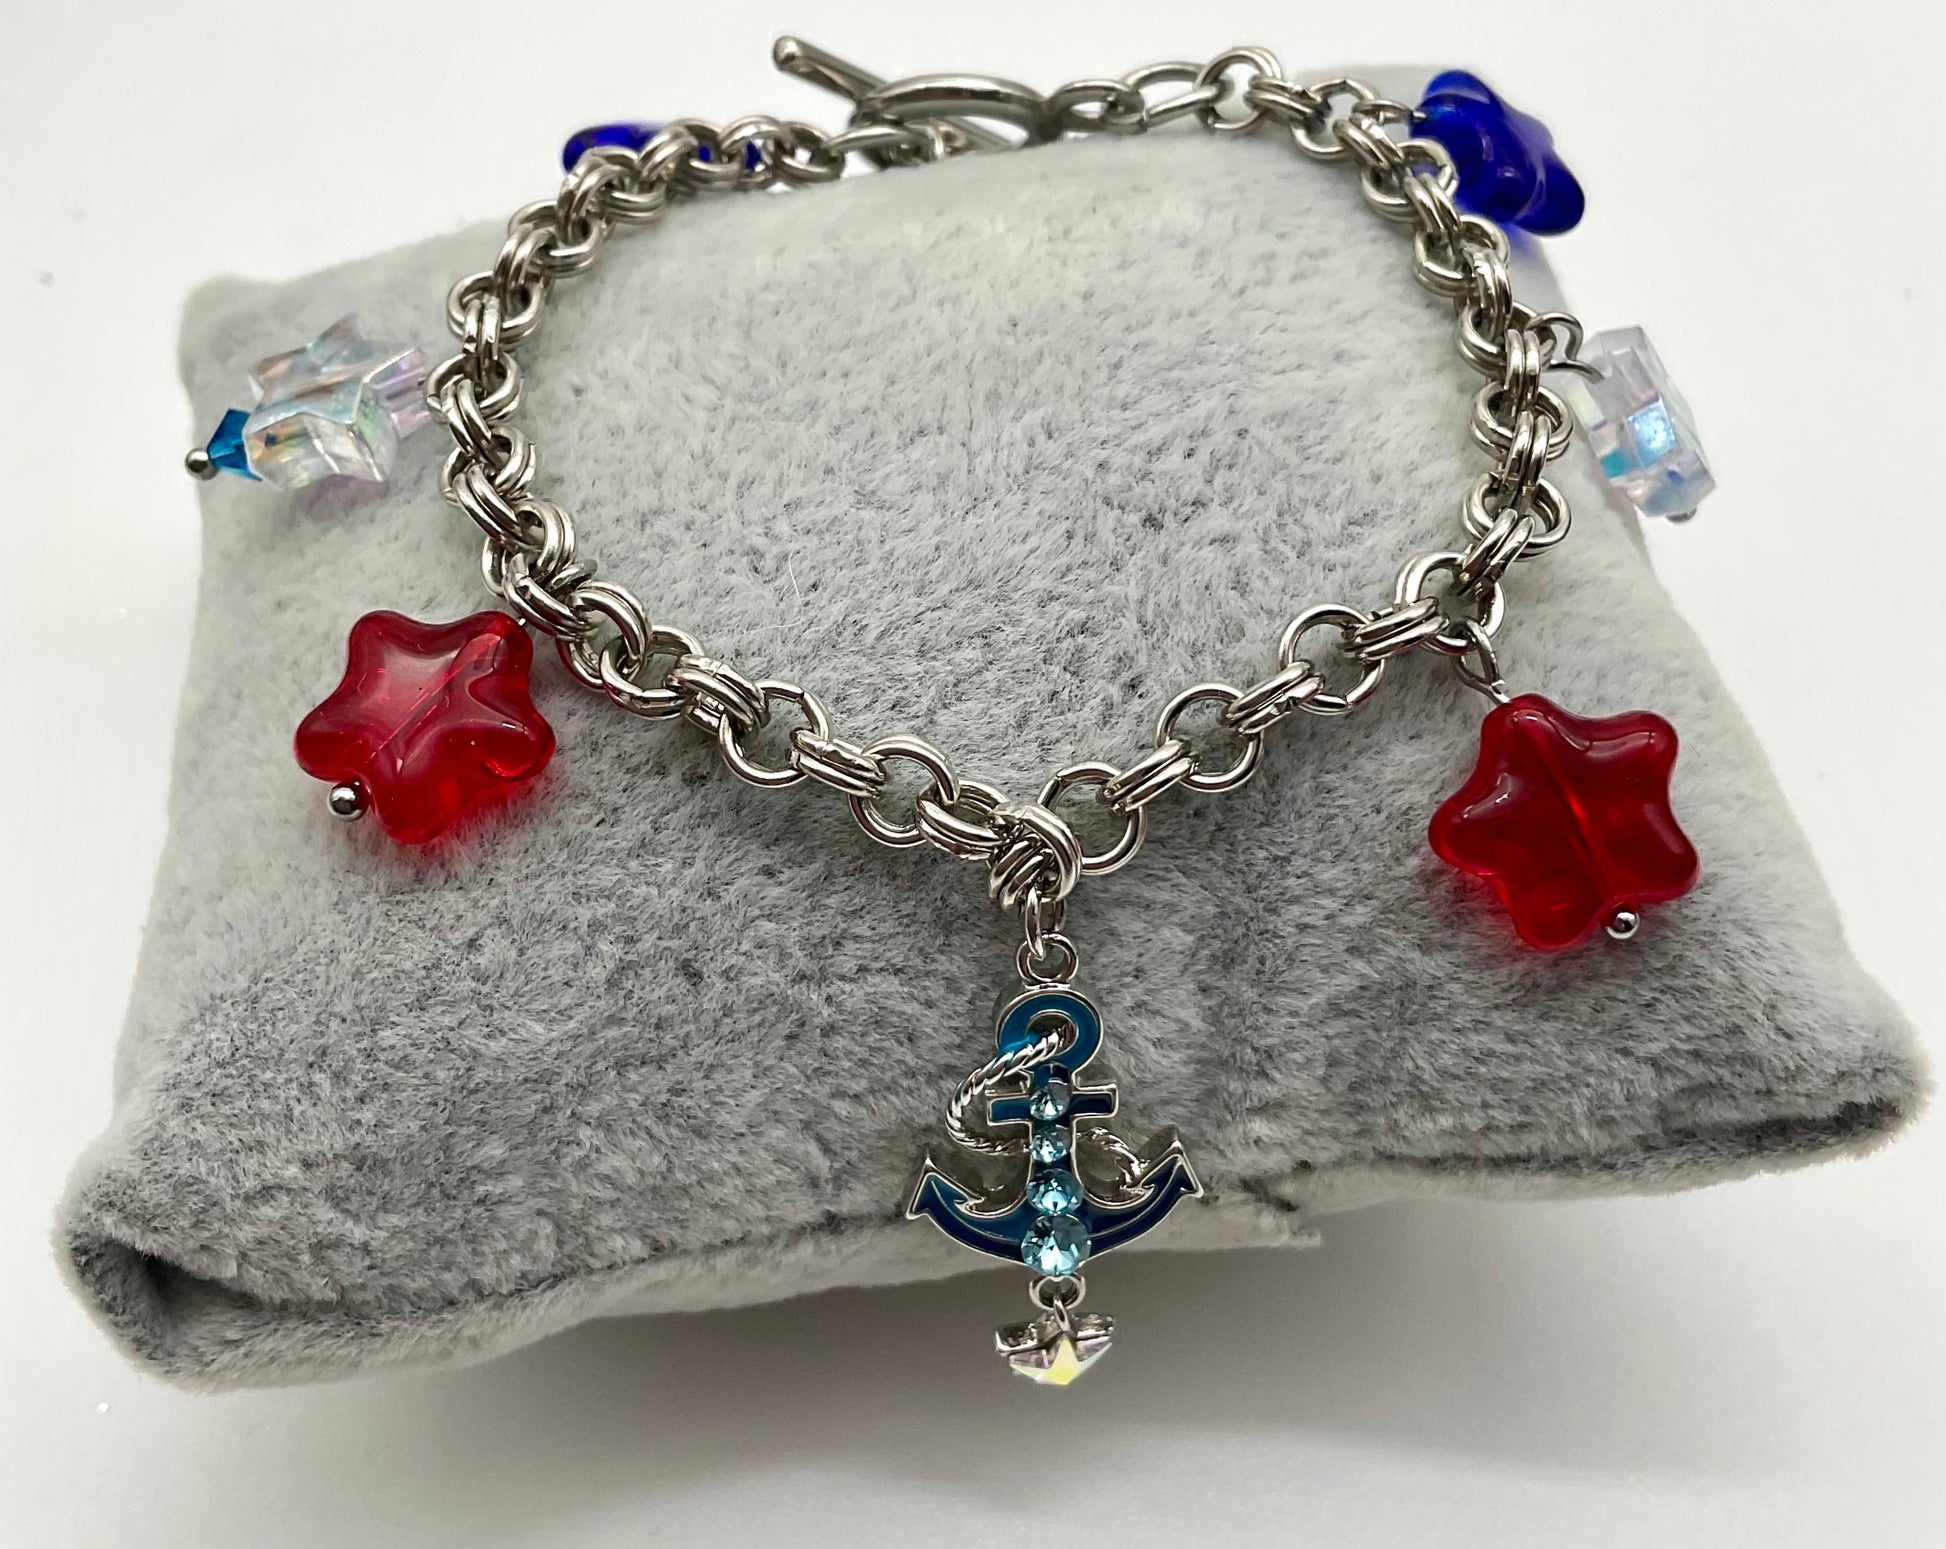 US Navy, Naval Sailor Anchor’s Away Bracelet Red , White and Blue Military Armed Forces USNC Stars Jewelry - 10% Donation to the USO